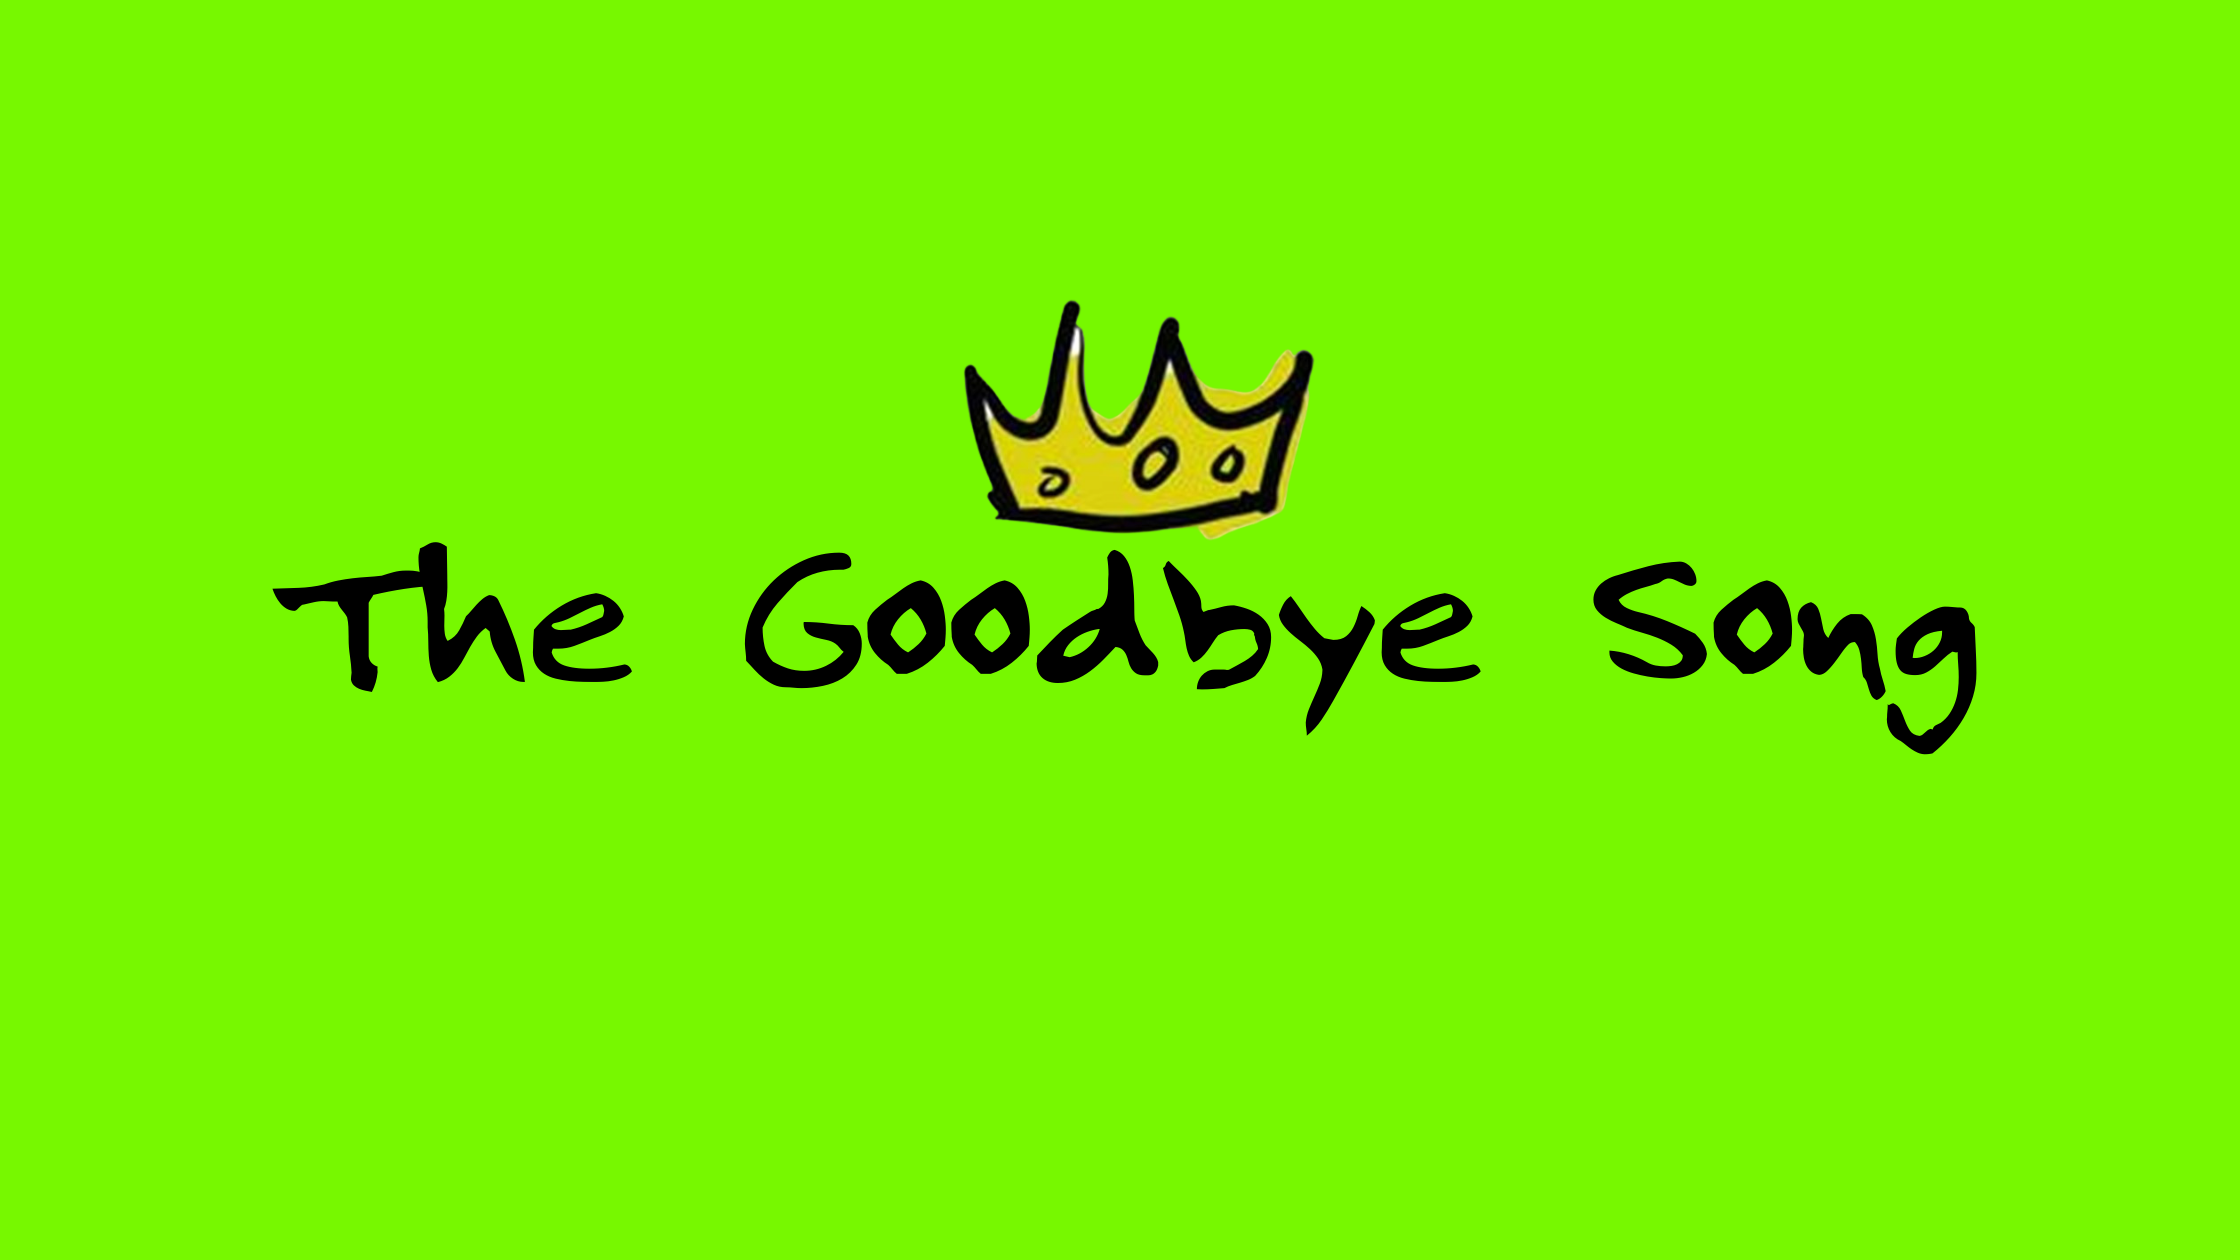 The Goodbye Song